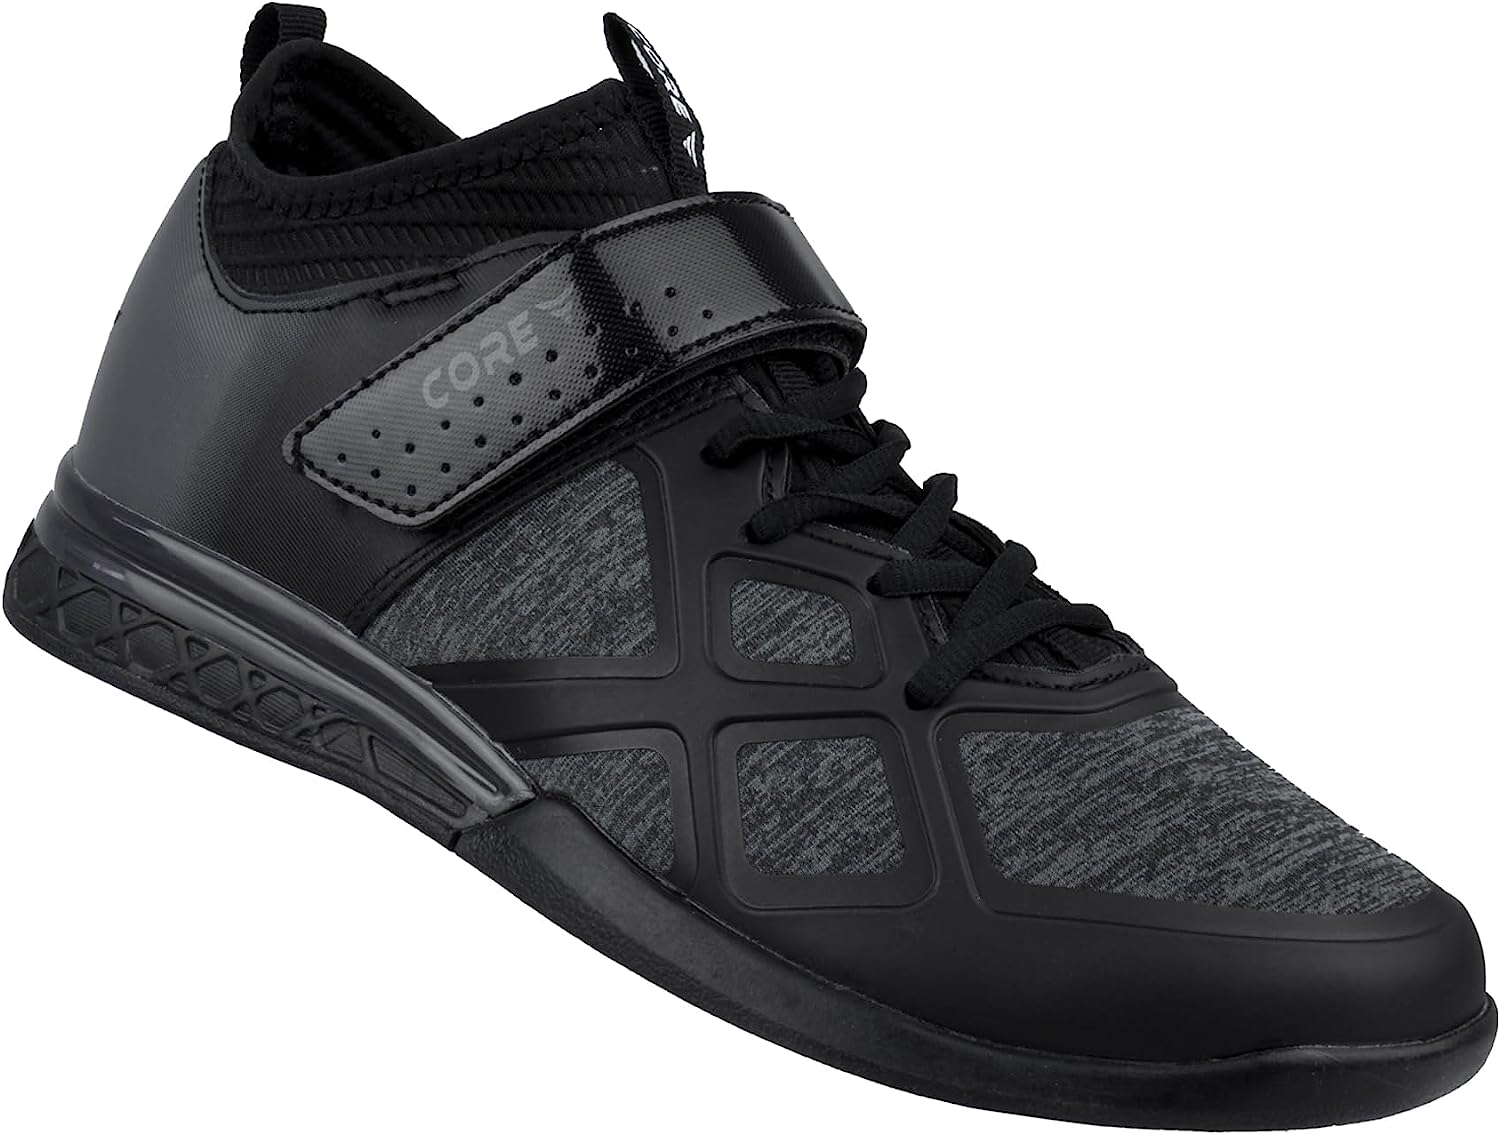 Core Cross-Training Shoes – Crossfit Shoes for [...]